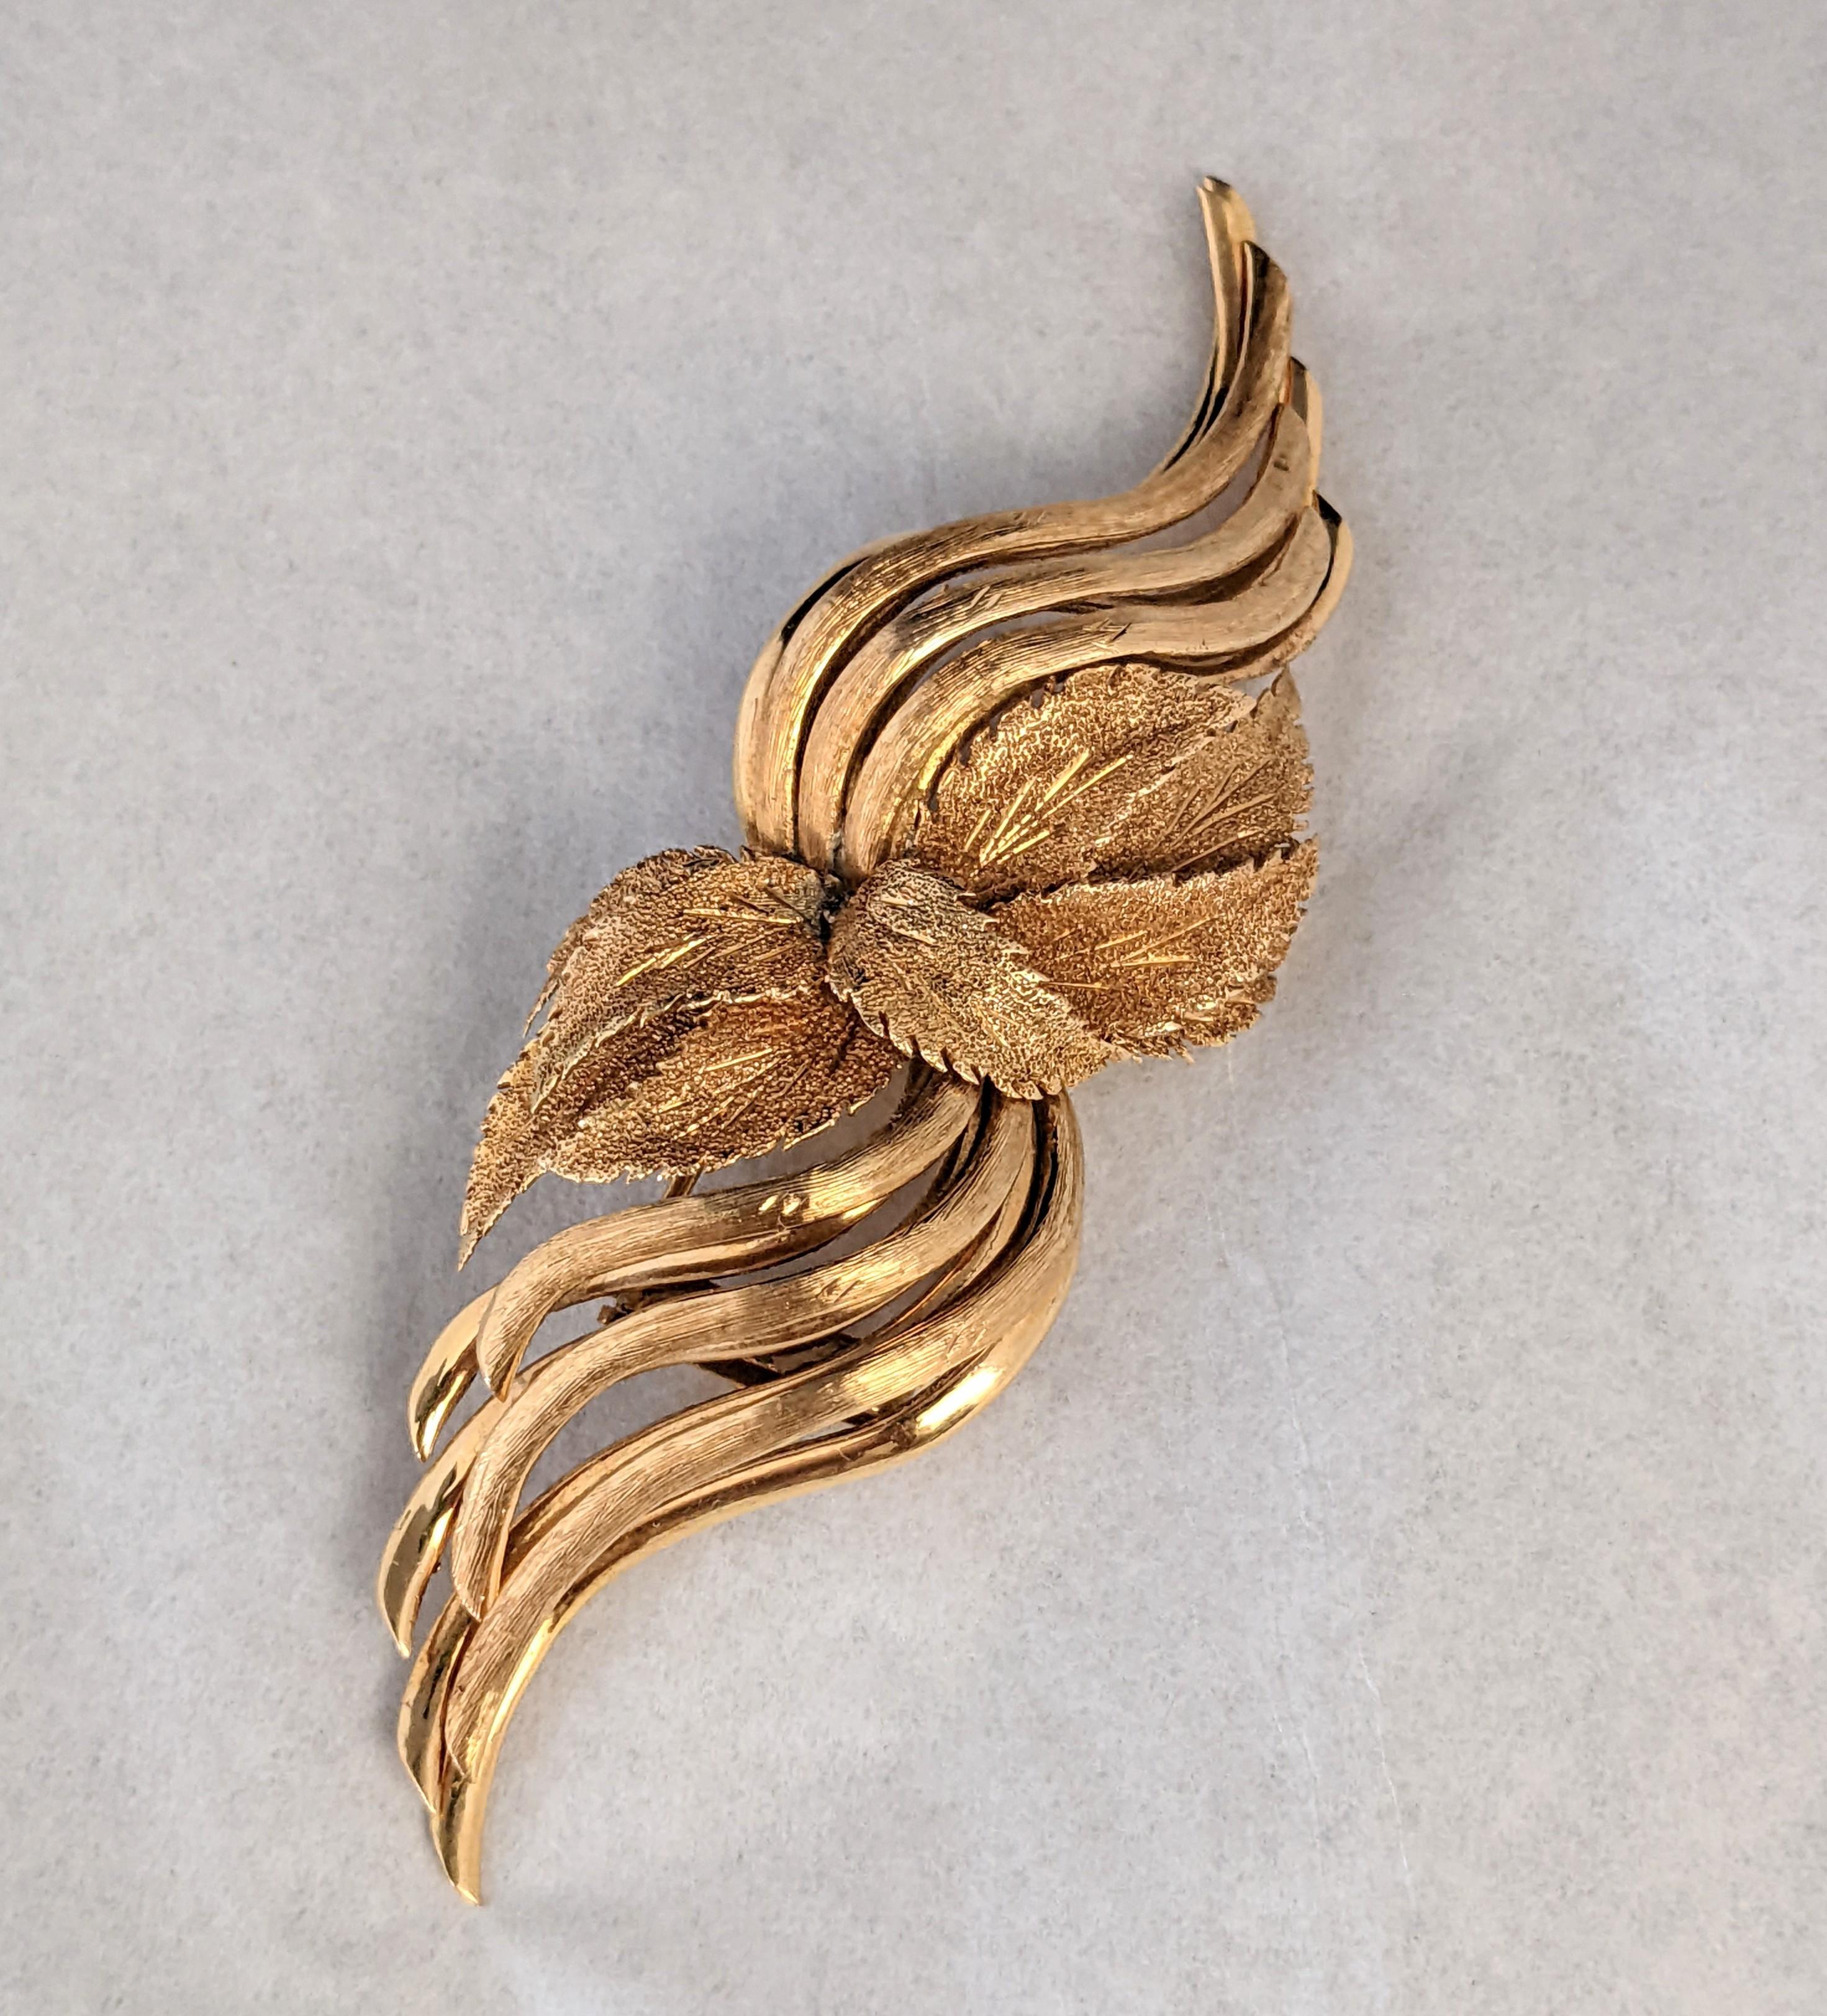 Large Leaf Ornamented Spray clip custom made in 18k gold. Large scale with central leaf cluster. There are both florentined and high polish sprays which emanate from the center to give the spray a dimensional feel like a pair of wings.  
1950's USA.